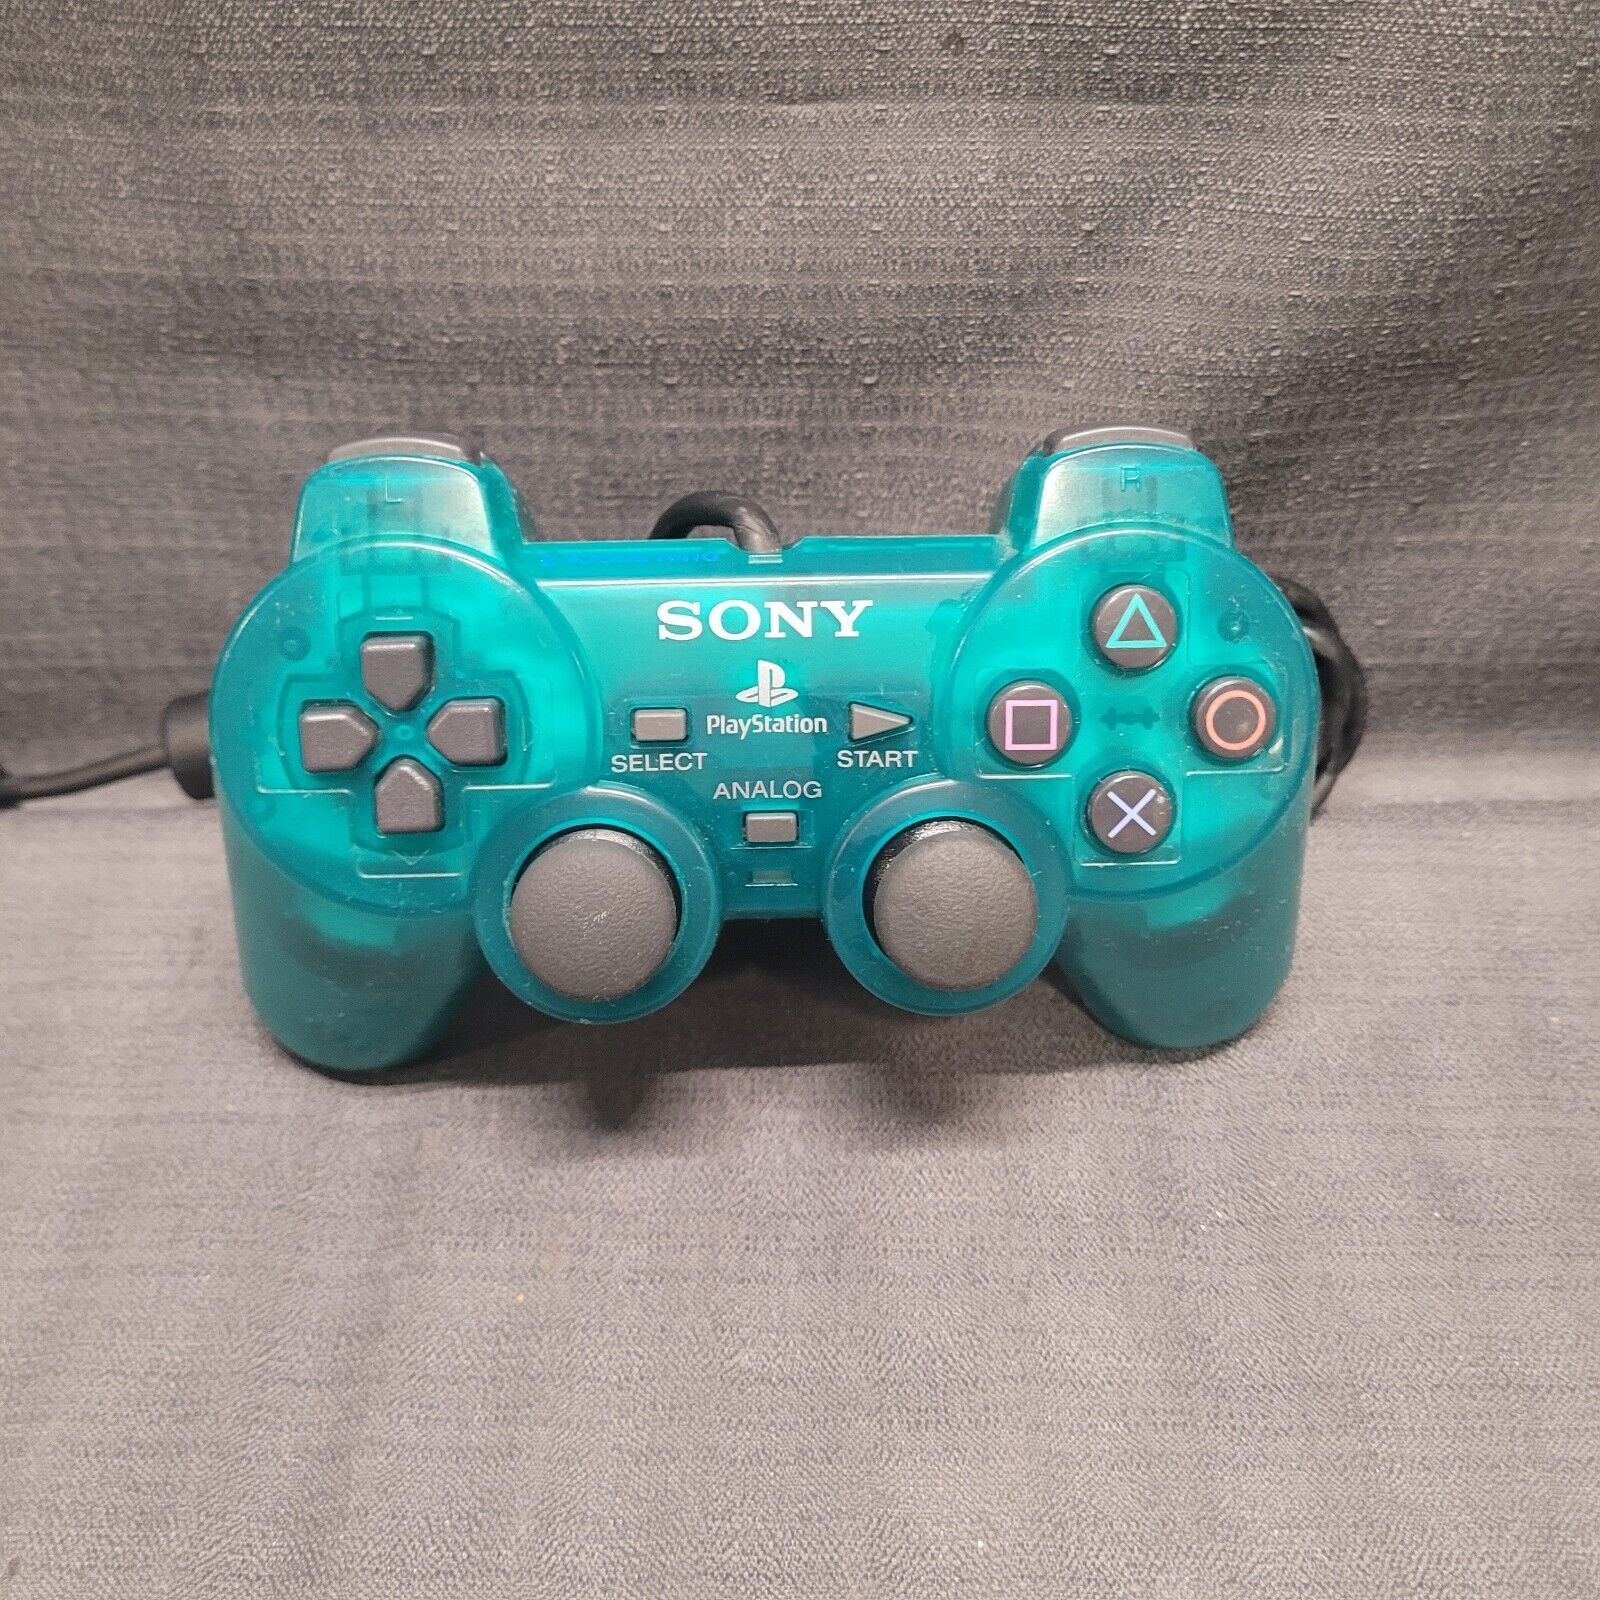 Sony PlayStation 2 PS2 Dualshock 2 Controller Emerald Green - $24.75